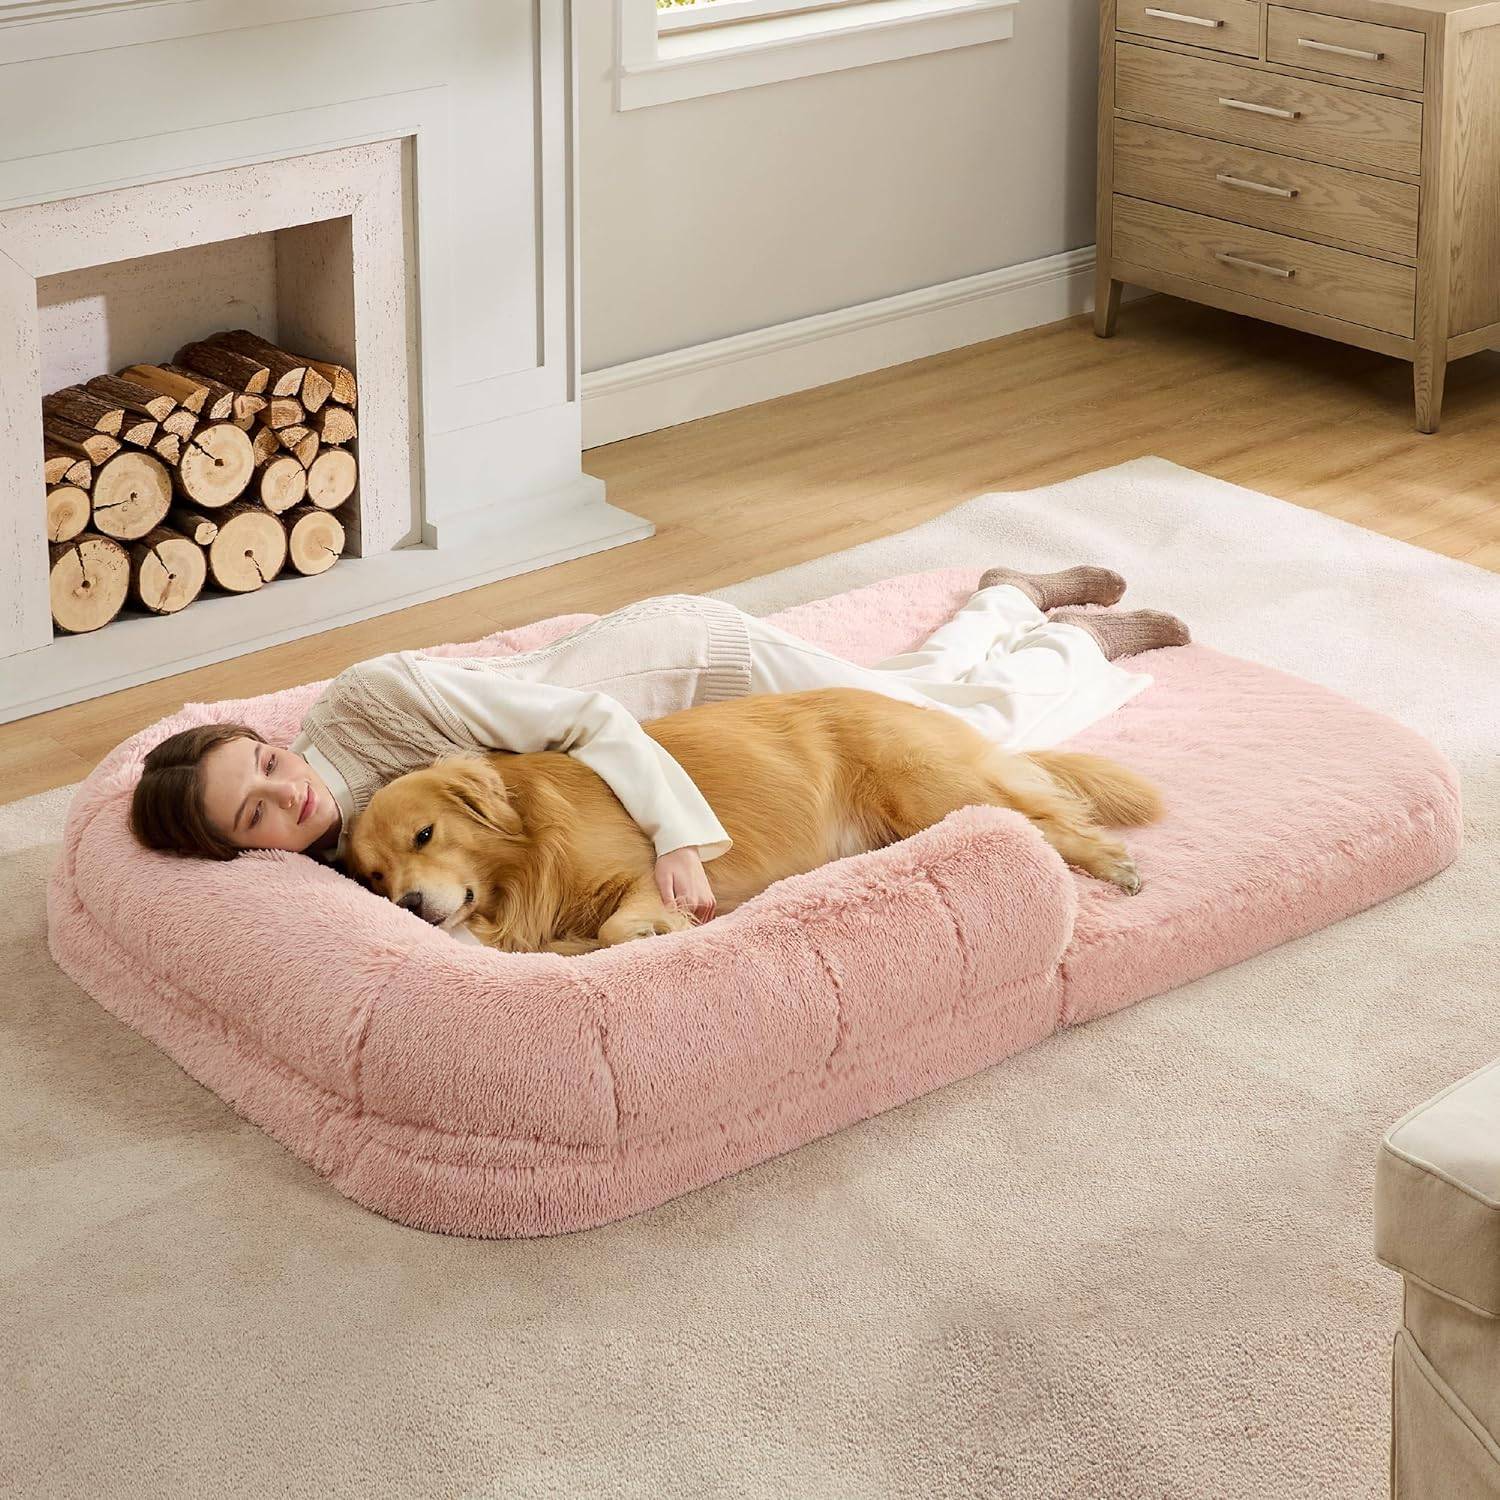 pink fuzzy human dog bed with woman and golden retriever sleeping in it